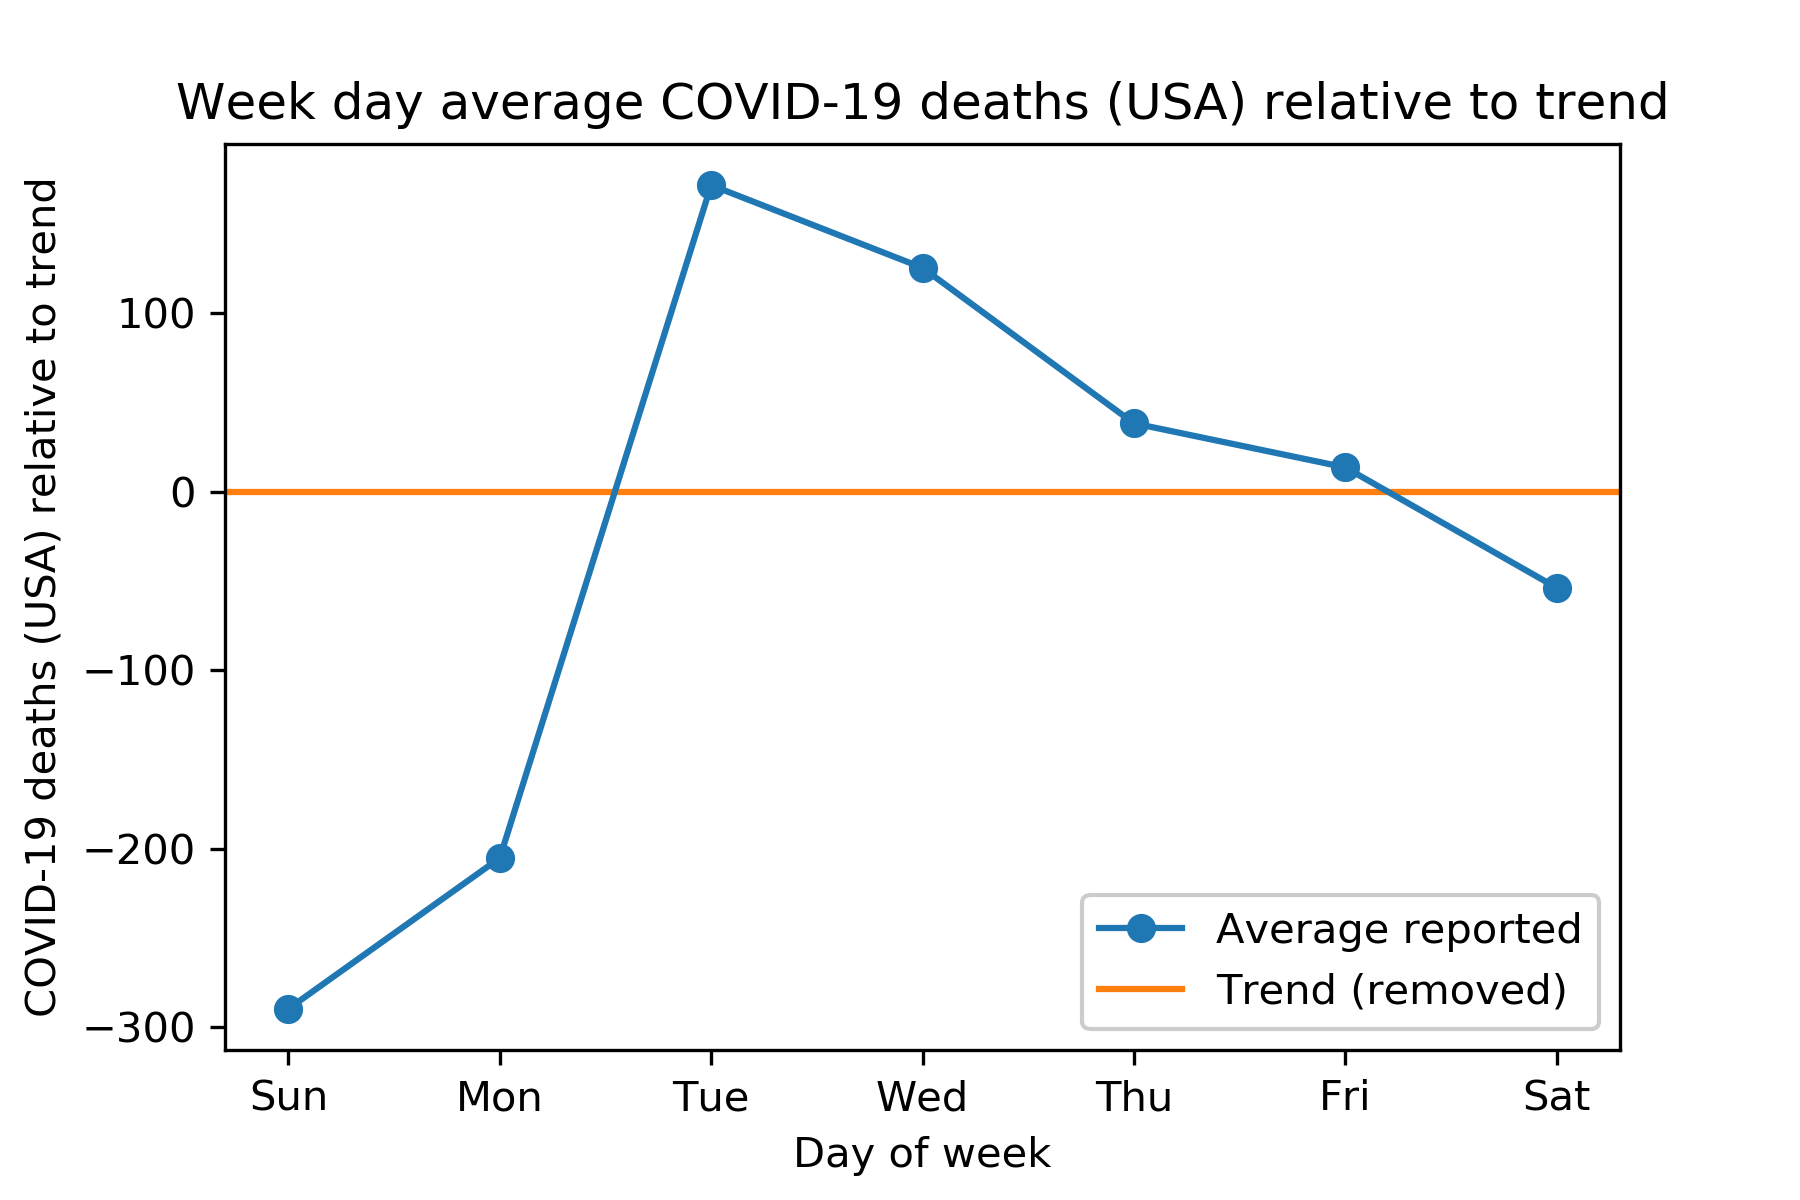 Week day average COVID-19 deaths (USA) relative to trend